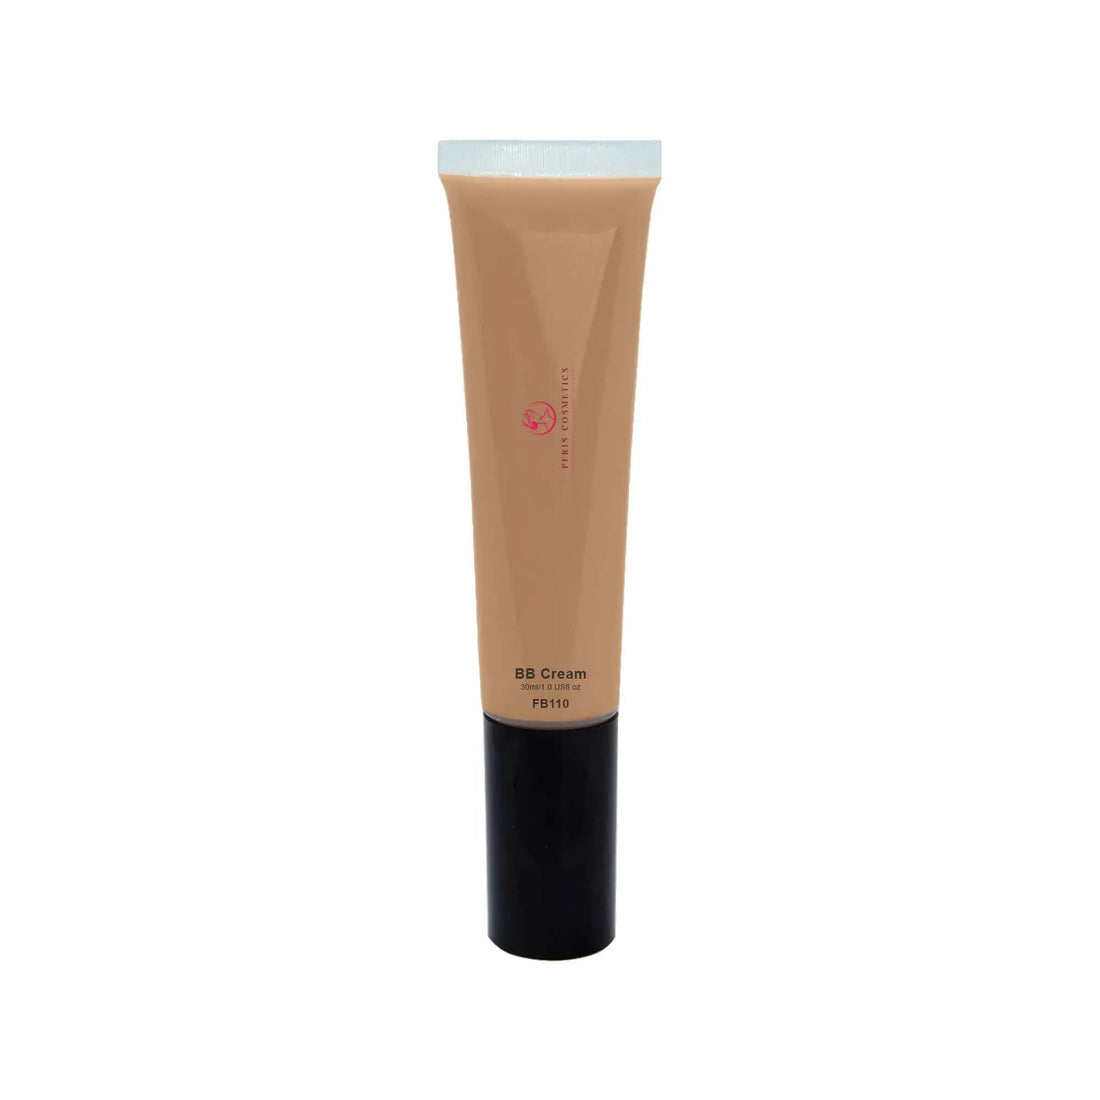 Peris Cosmetics Sienna Love BB Cream with SPF: Hydration, Line Smoothing, and Sun Protection for Flawless Skin Kylie Cosmetics Amazon